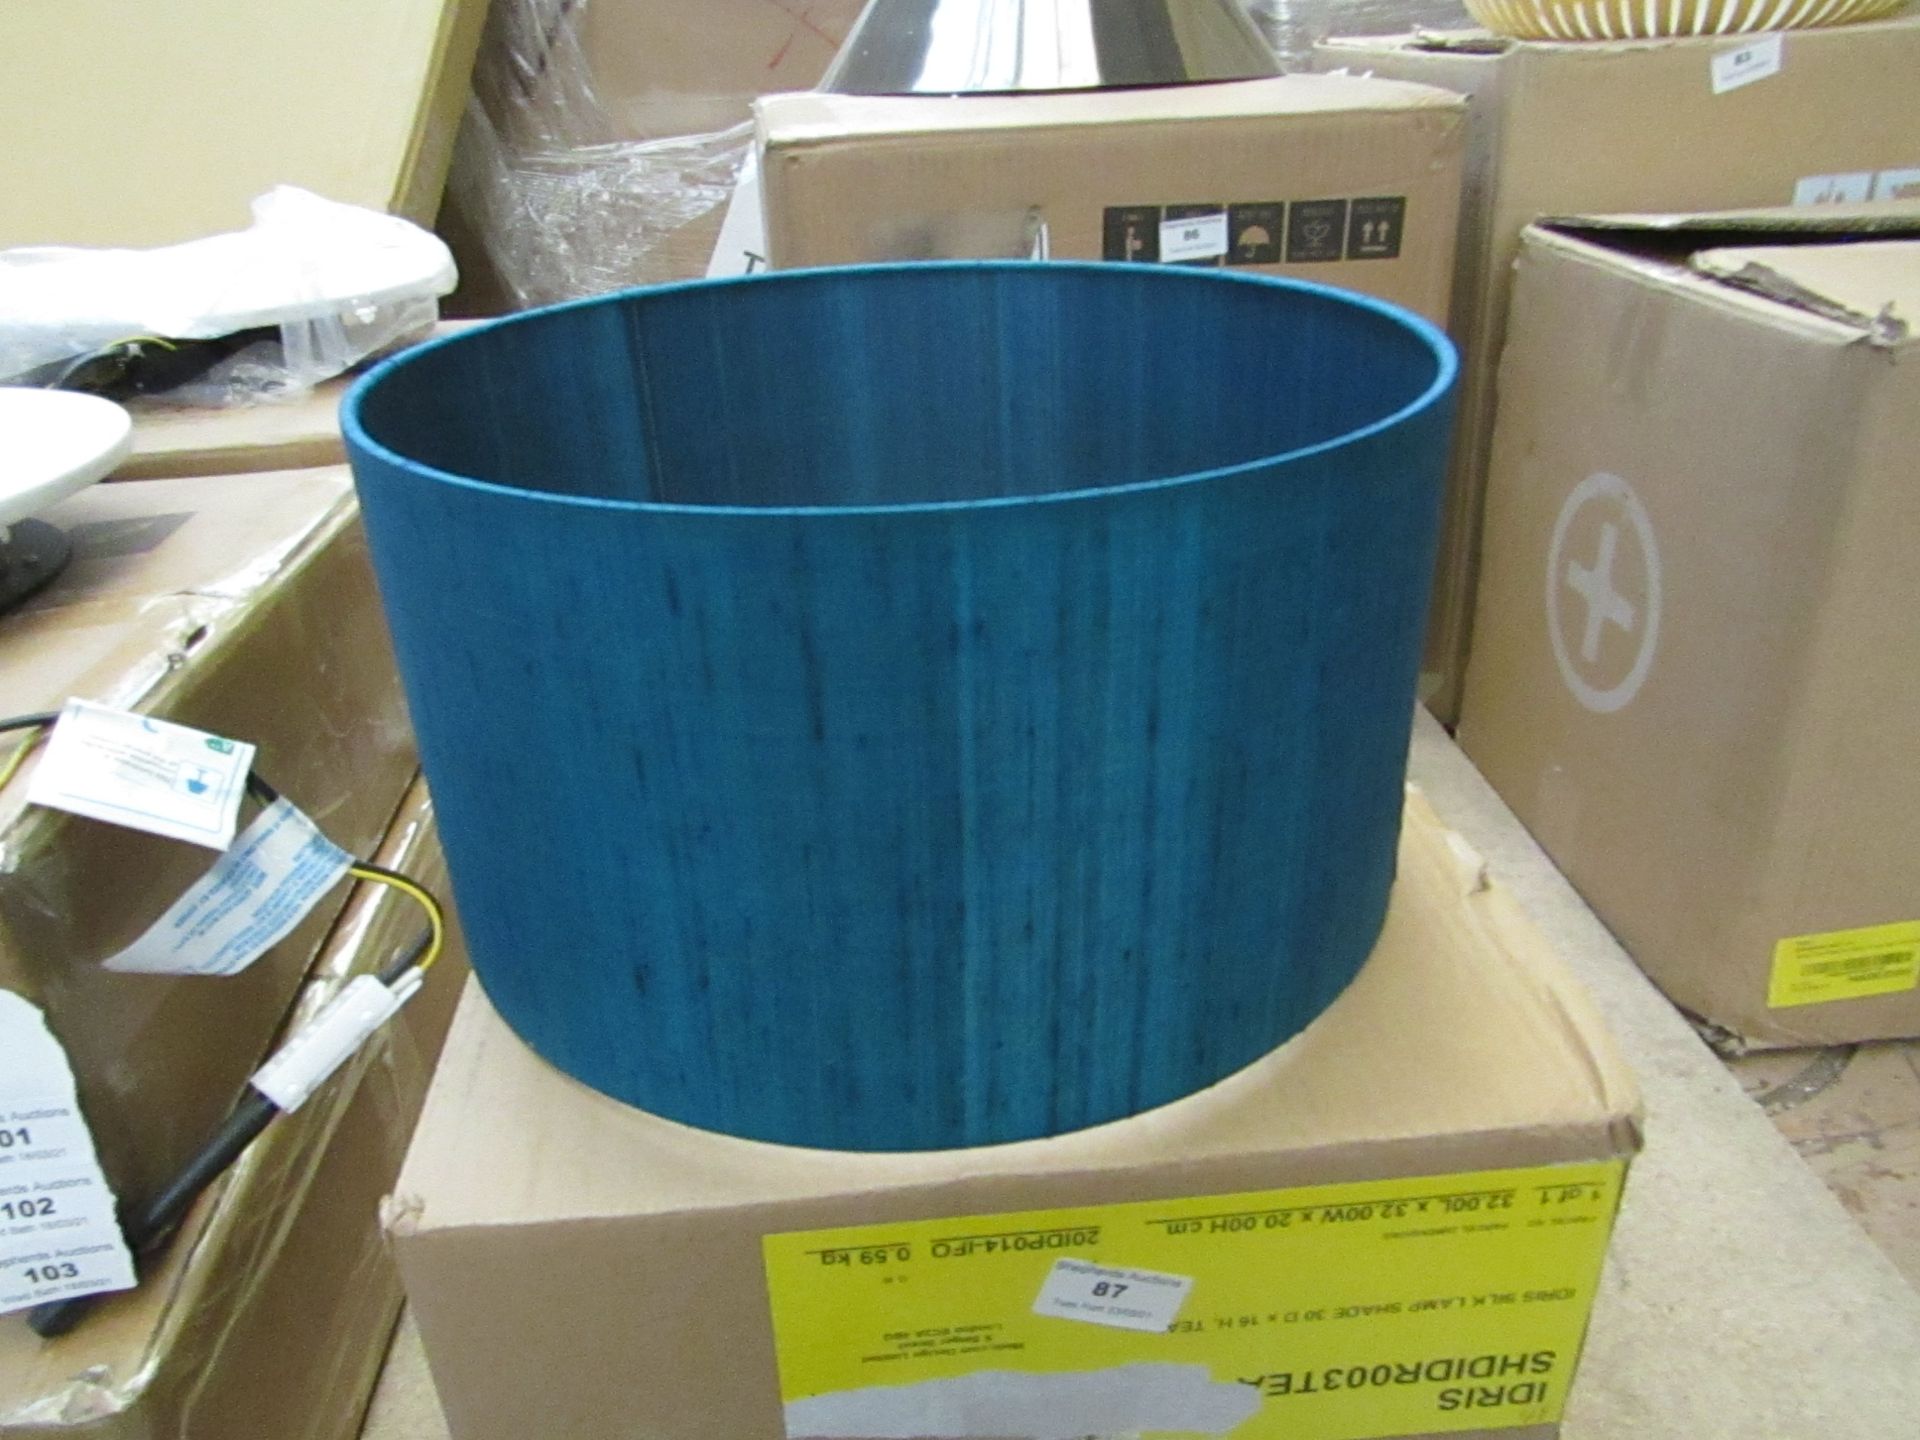 | 1X | MADE.COM IDRIS SILK LAMP SHADE 30 D X 16 H, TEAL | HAS A SMALL HOLE IN THE SHADE & BOXED |